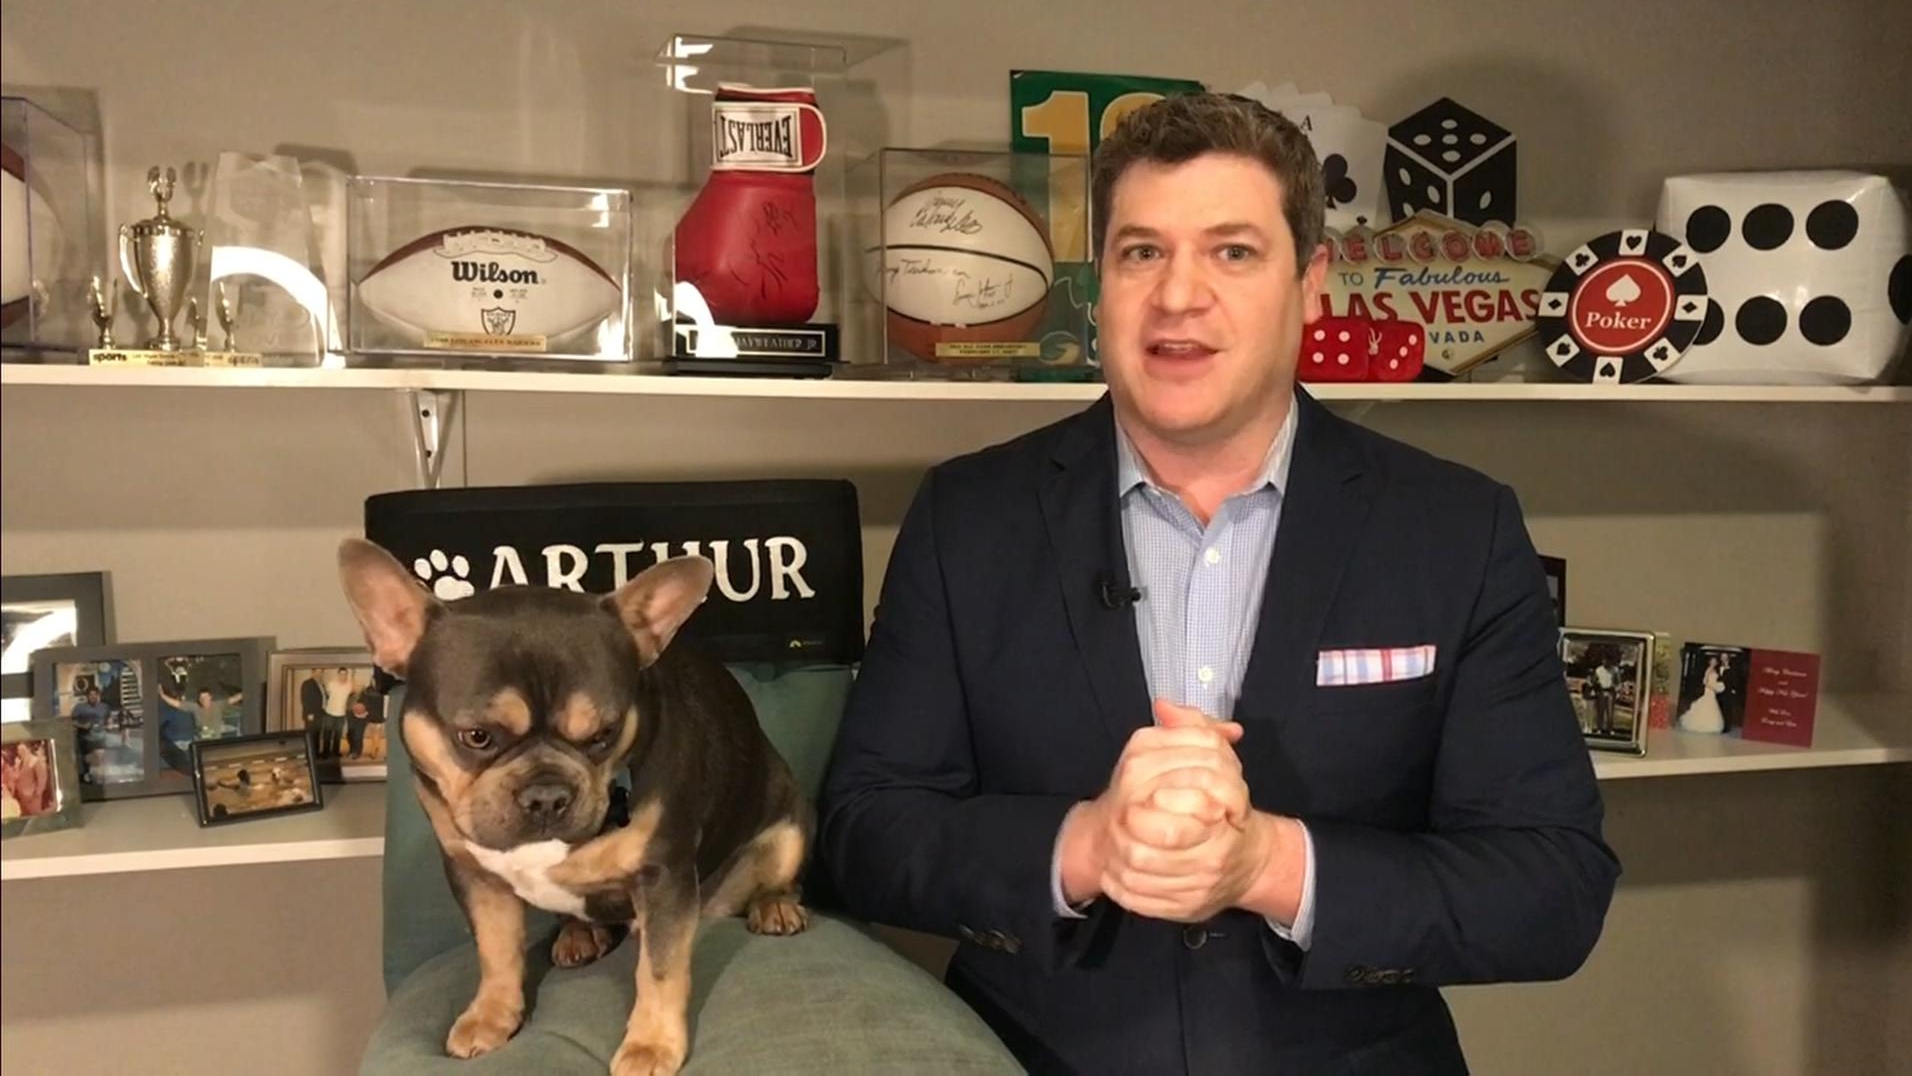 Doug Kezirian and Arthur give their underdog bets of the day